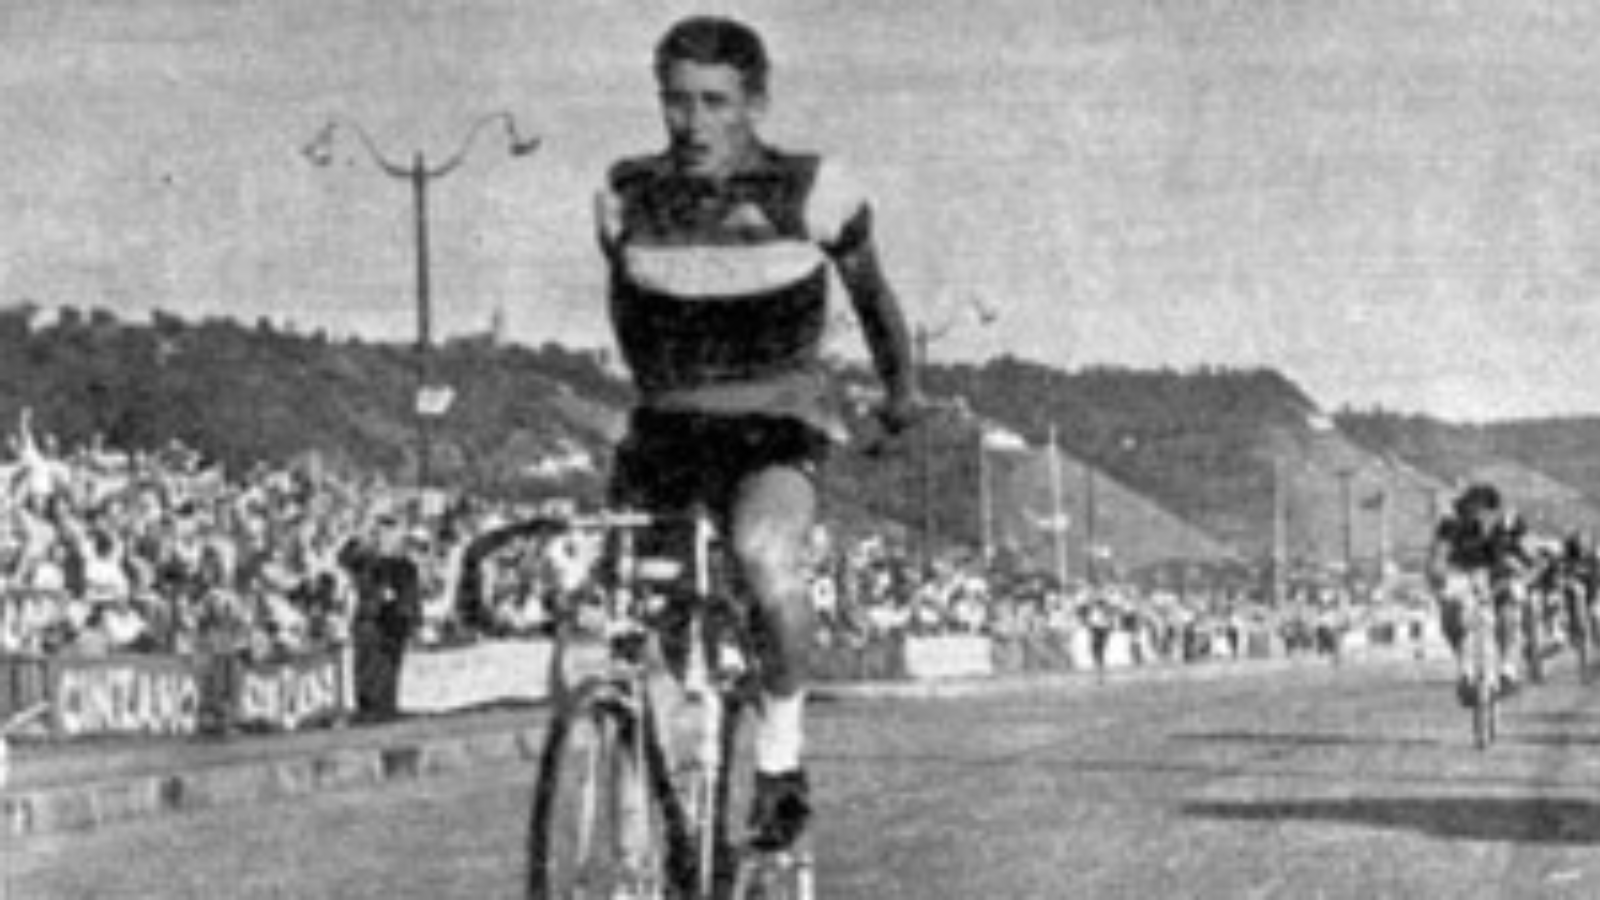 On this day in cycling history Jacques Anquetil wins his first Tour de France stage